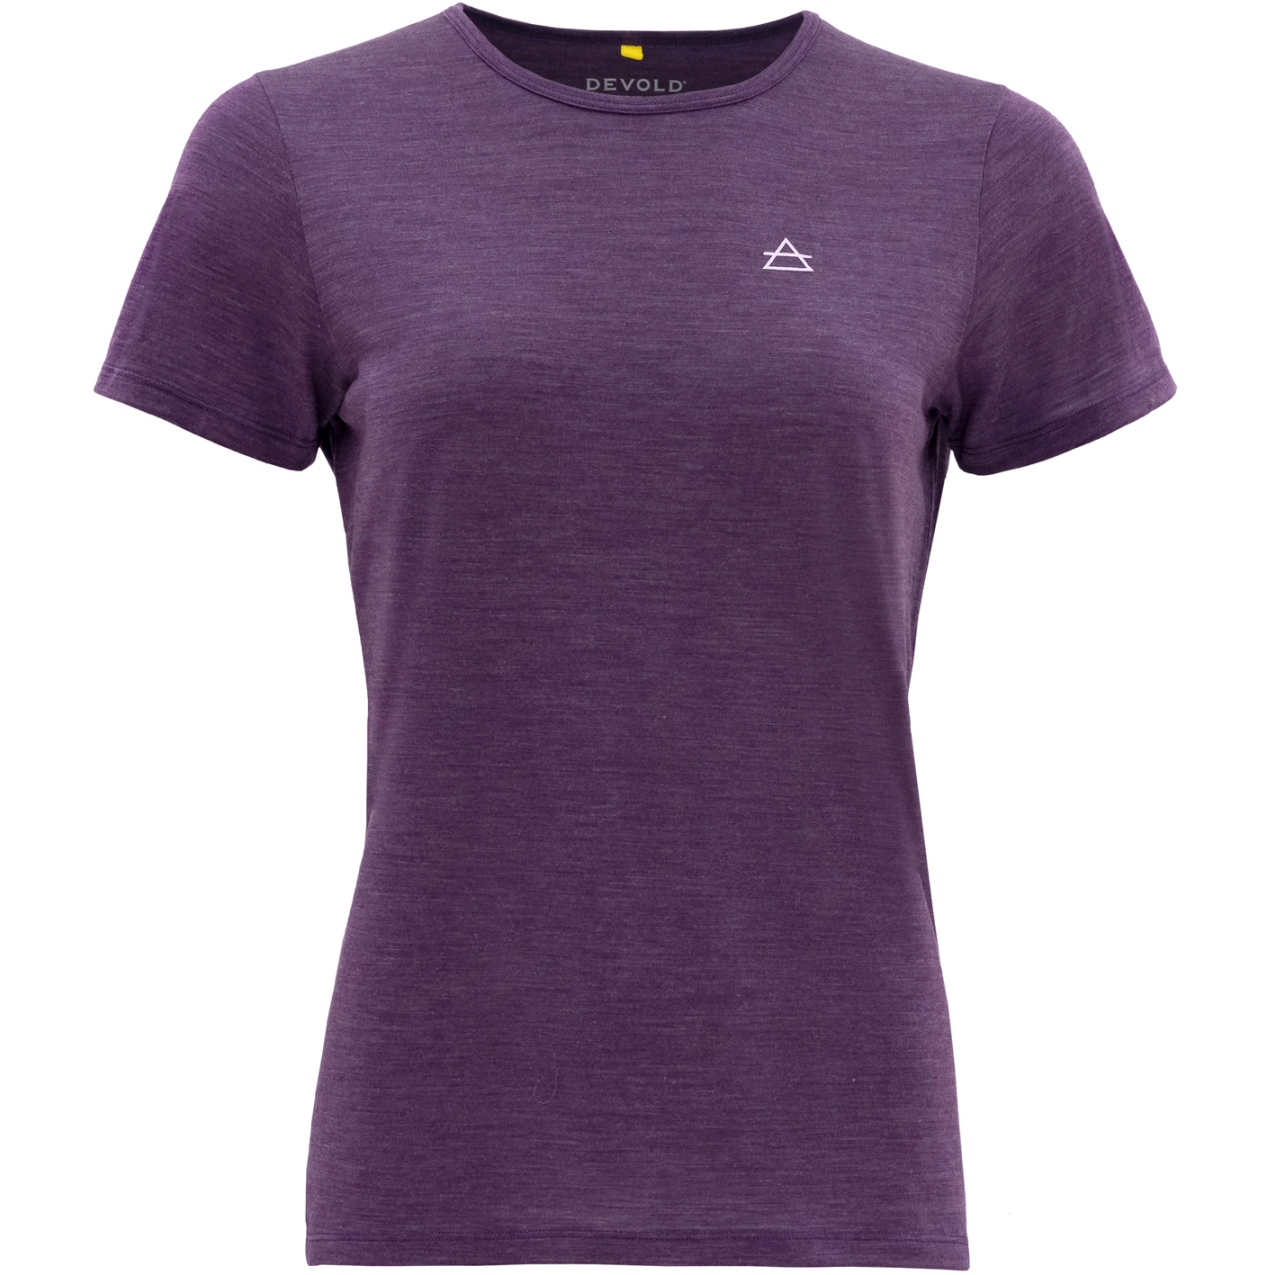 Picture of Devold Valldal Merino 130 Tee Women - 228A Lilac